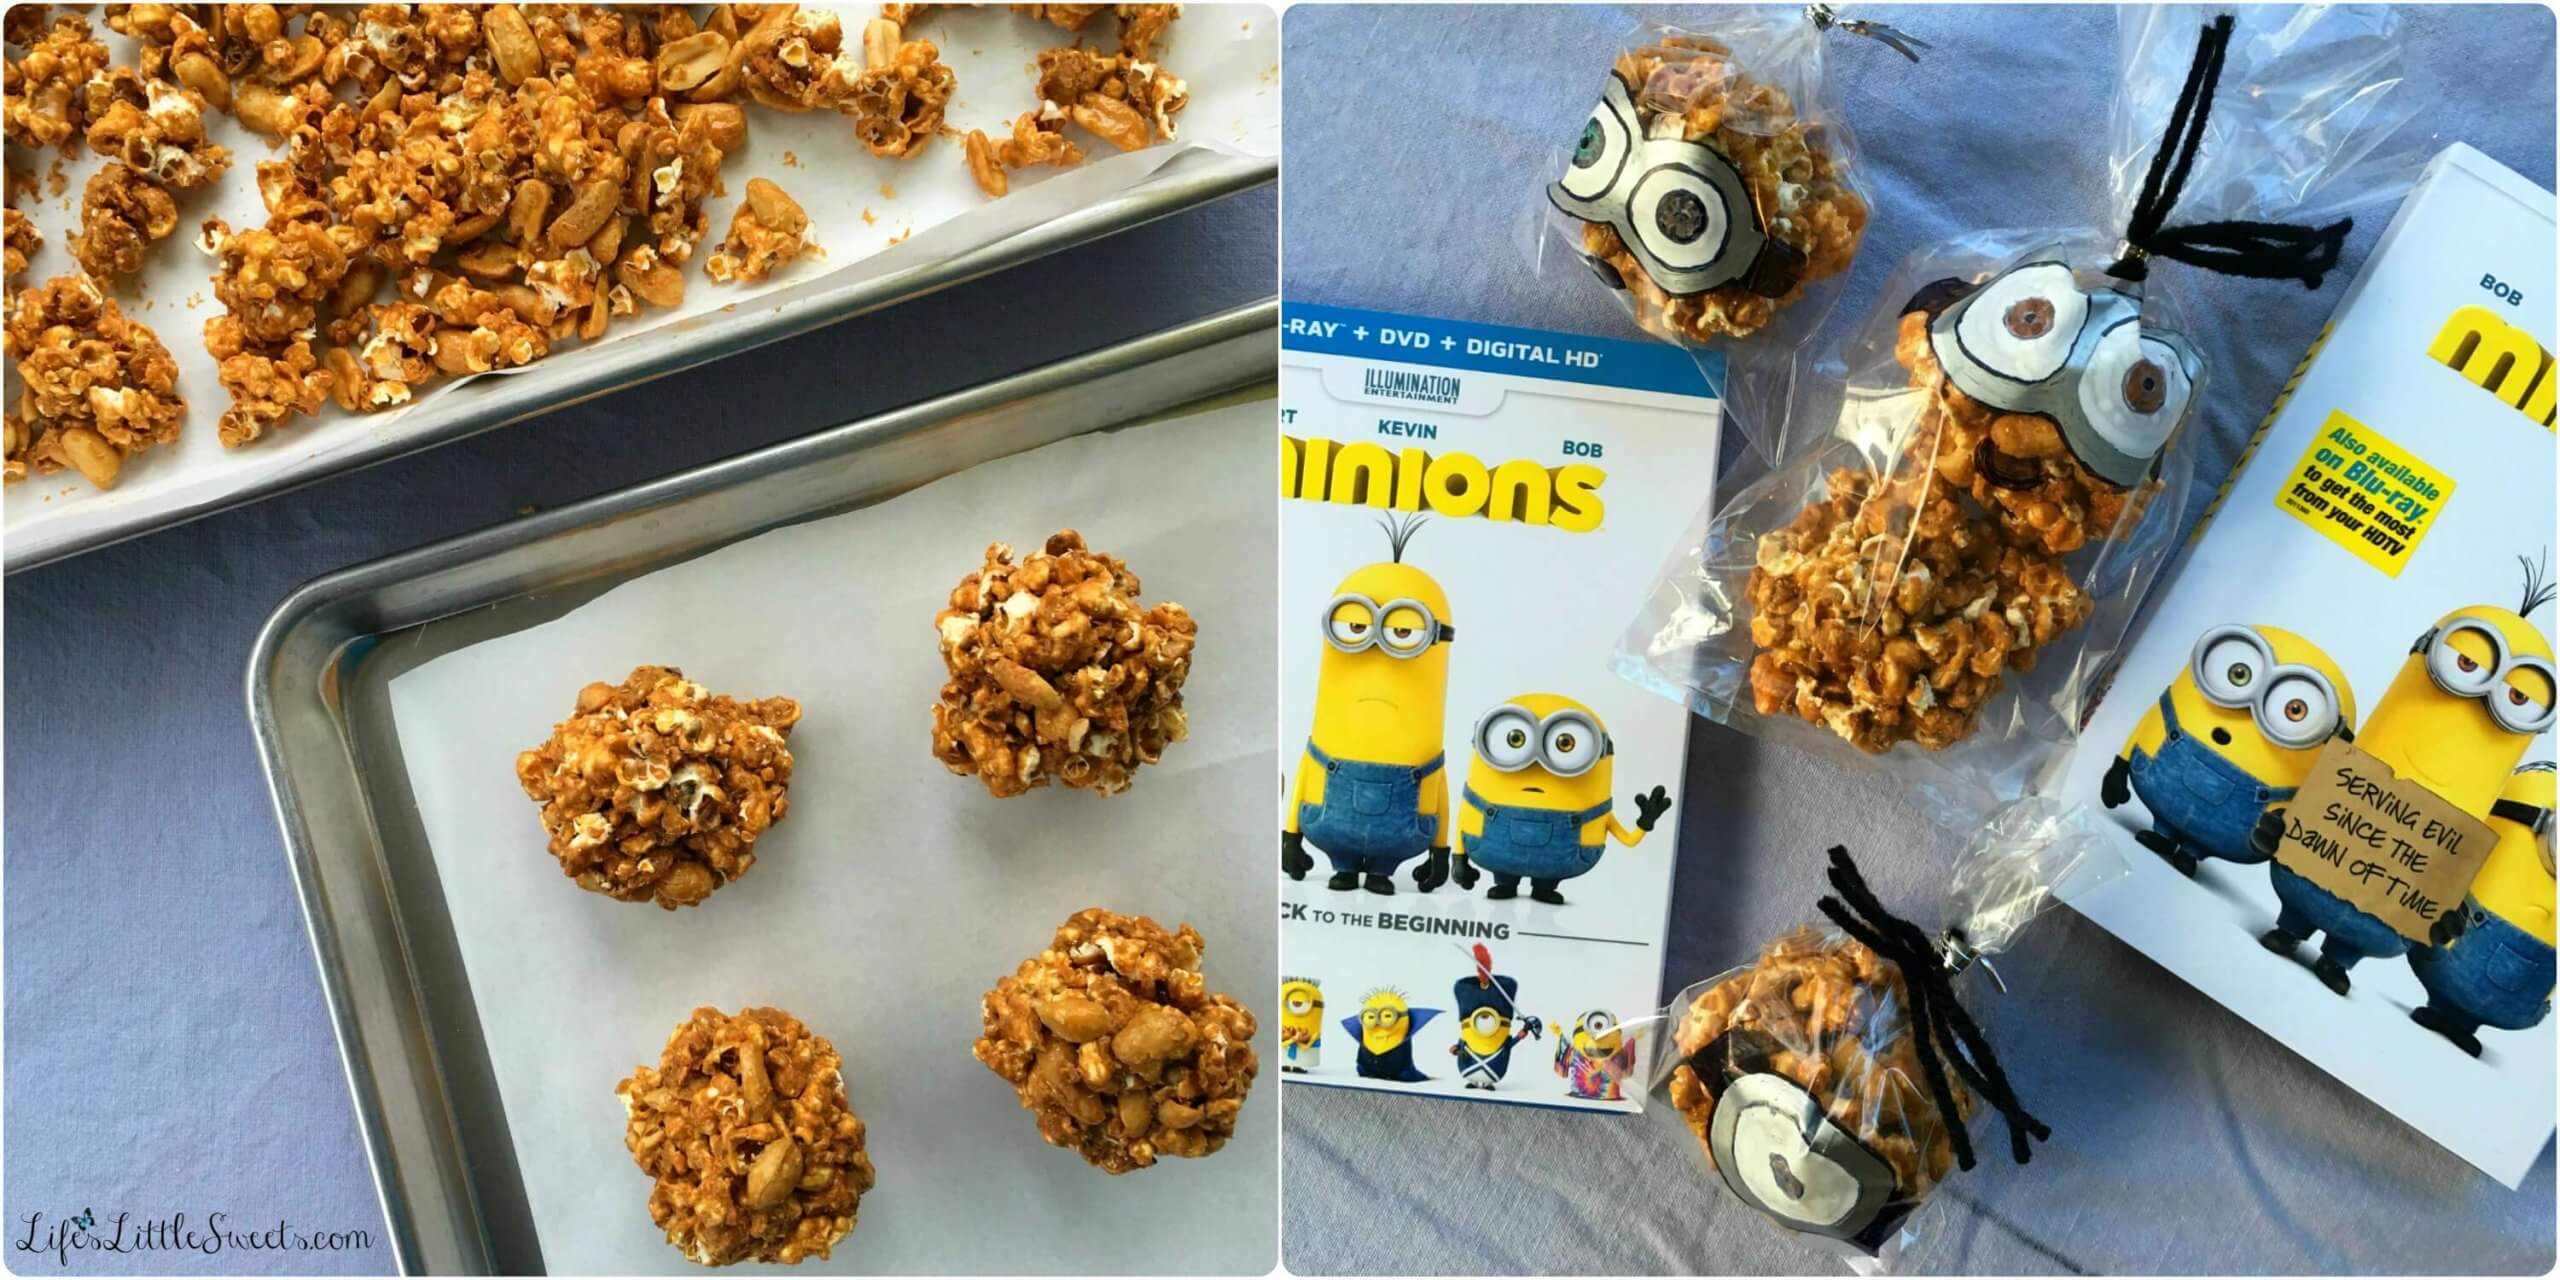 Caramel Popcorn Balls on a rimmed baking sheet with the Minions theme